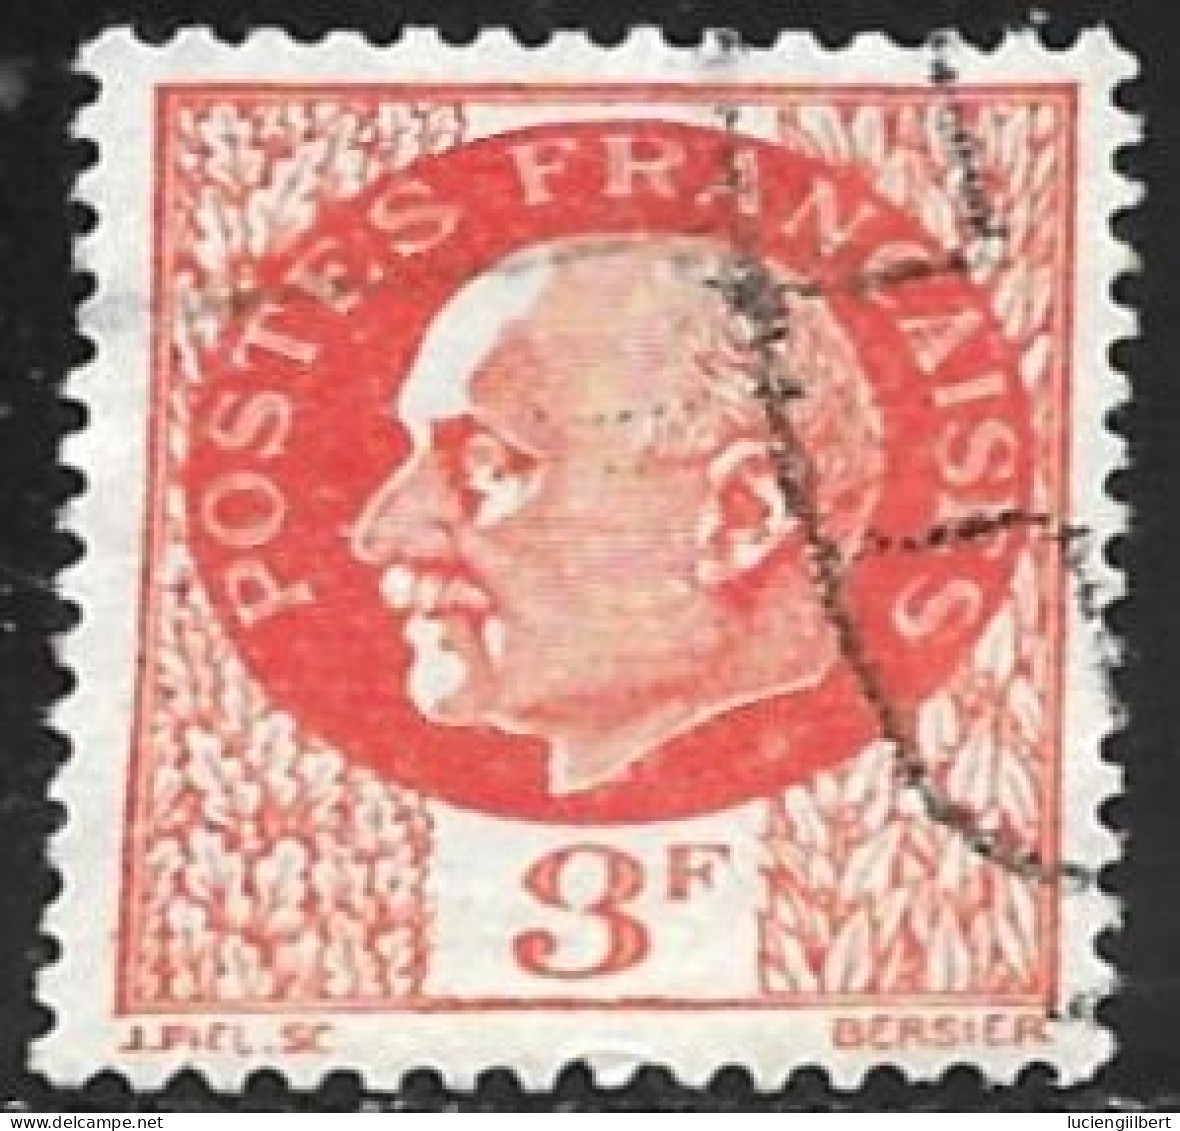 TIMBRE N° 521  -  PETAIN  -  OBLITERE  -  1941 - Used Stamps